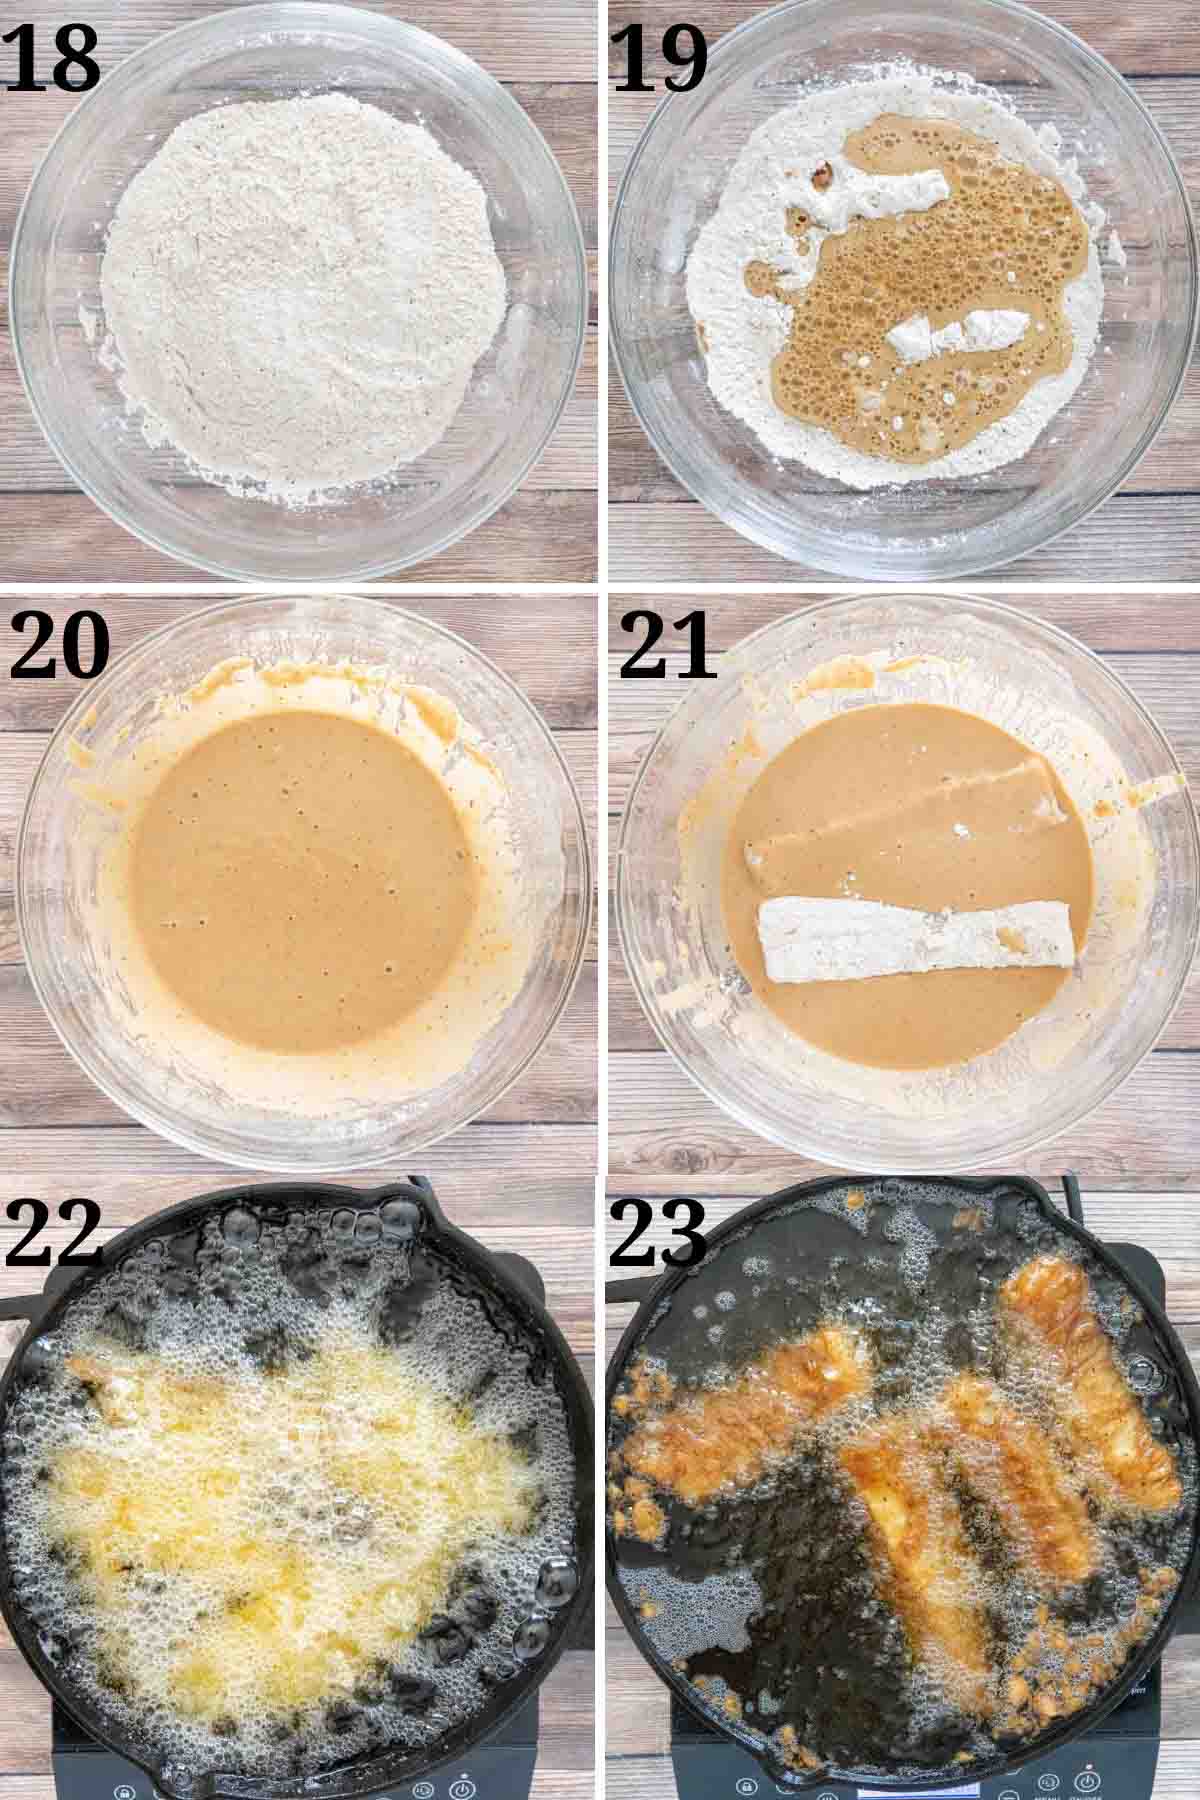 Collage showing how to make beer batter and fry cod.